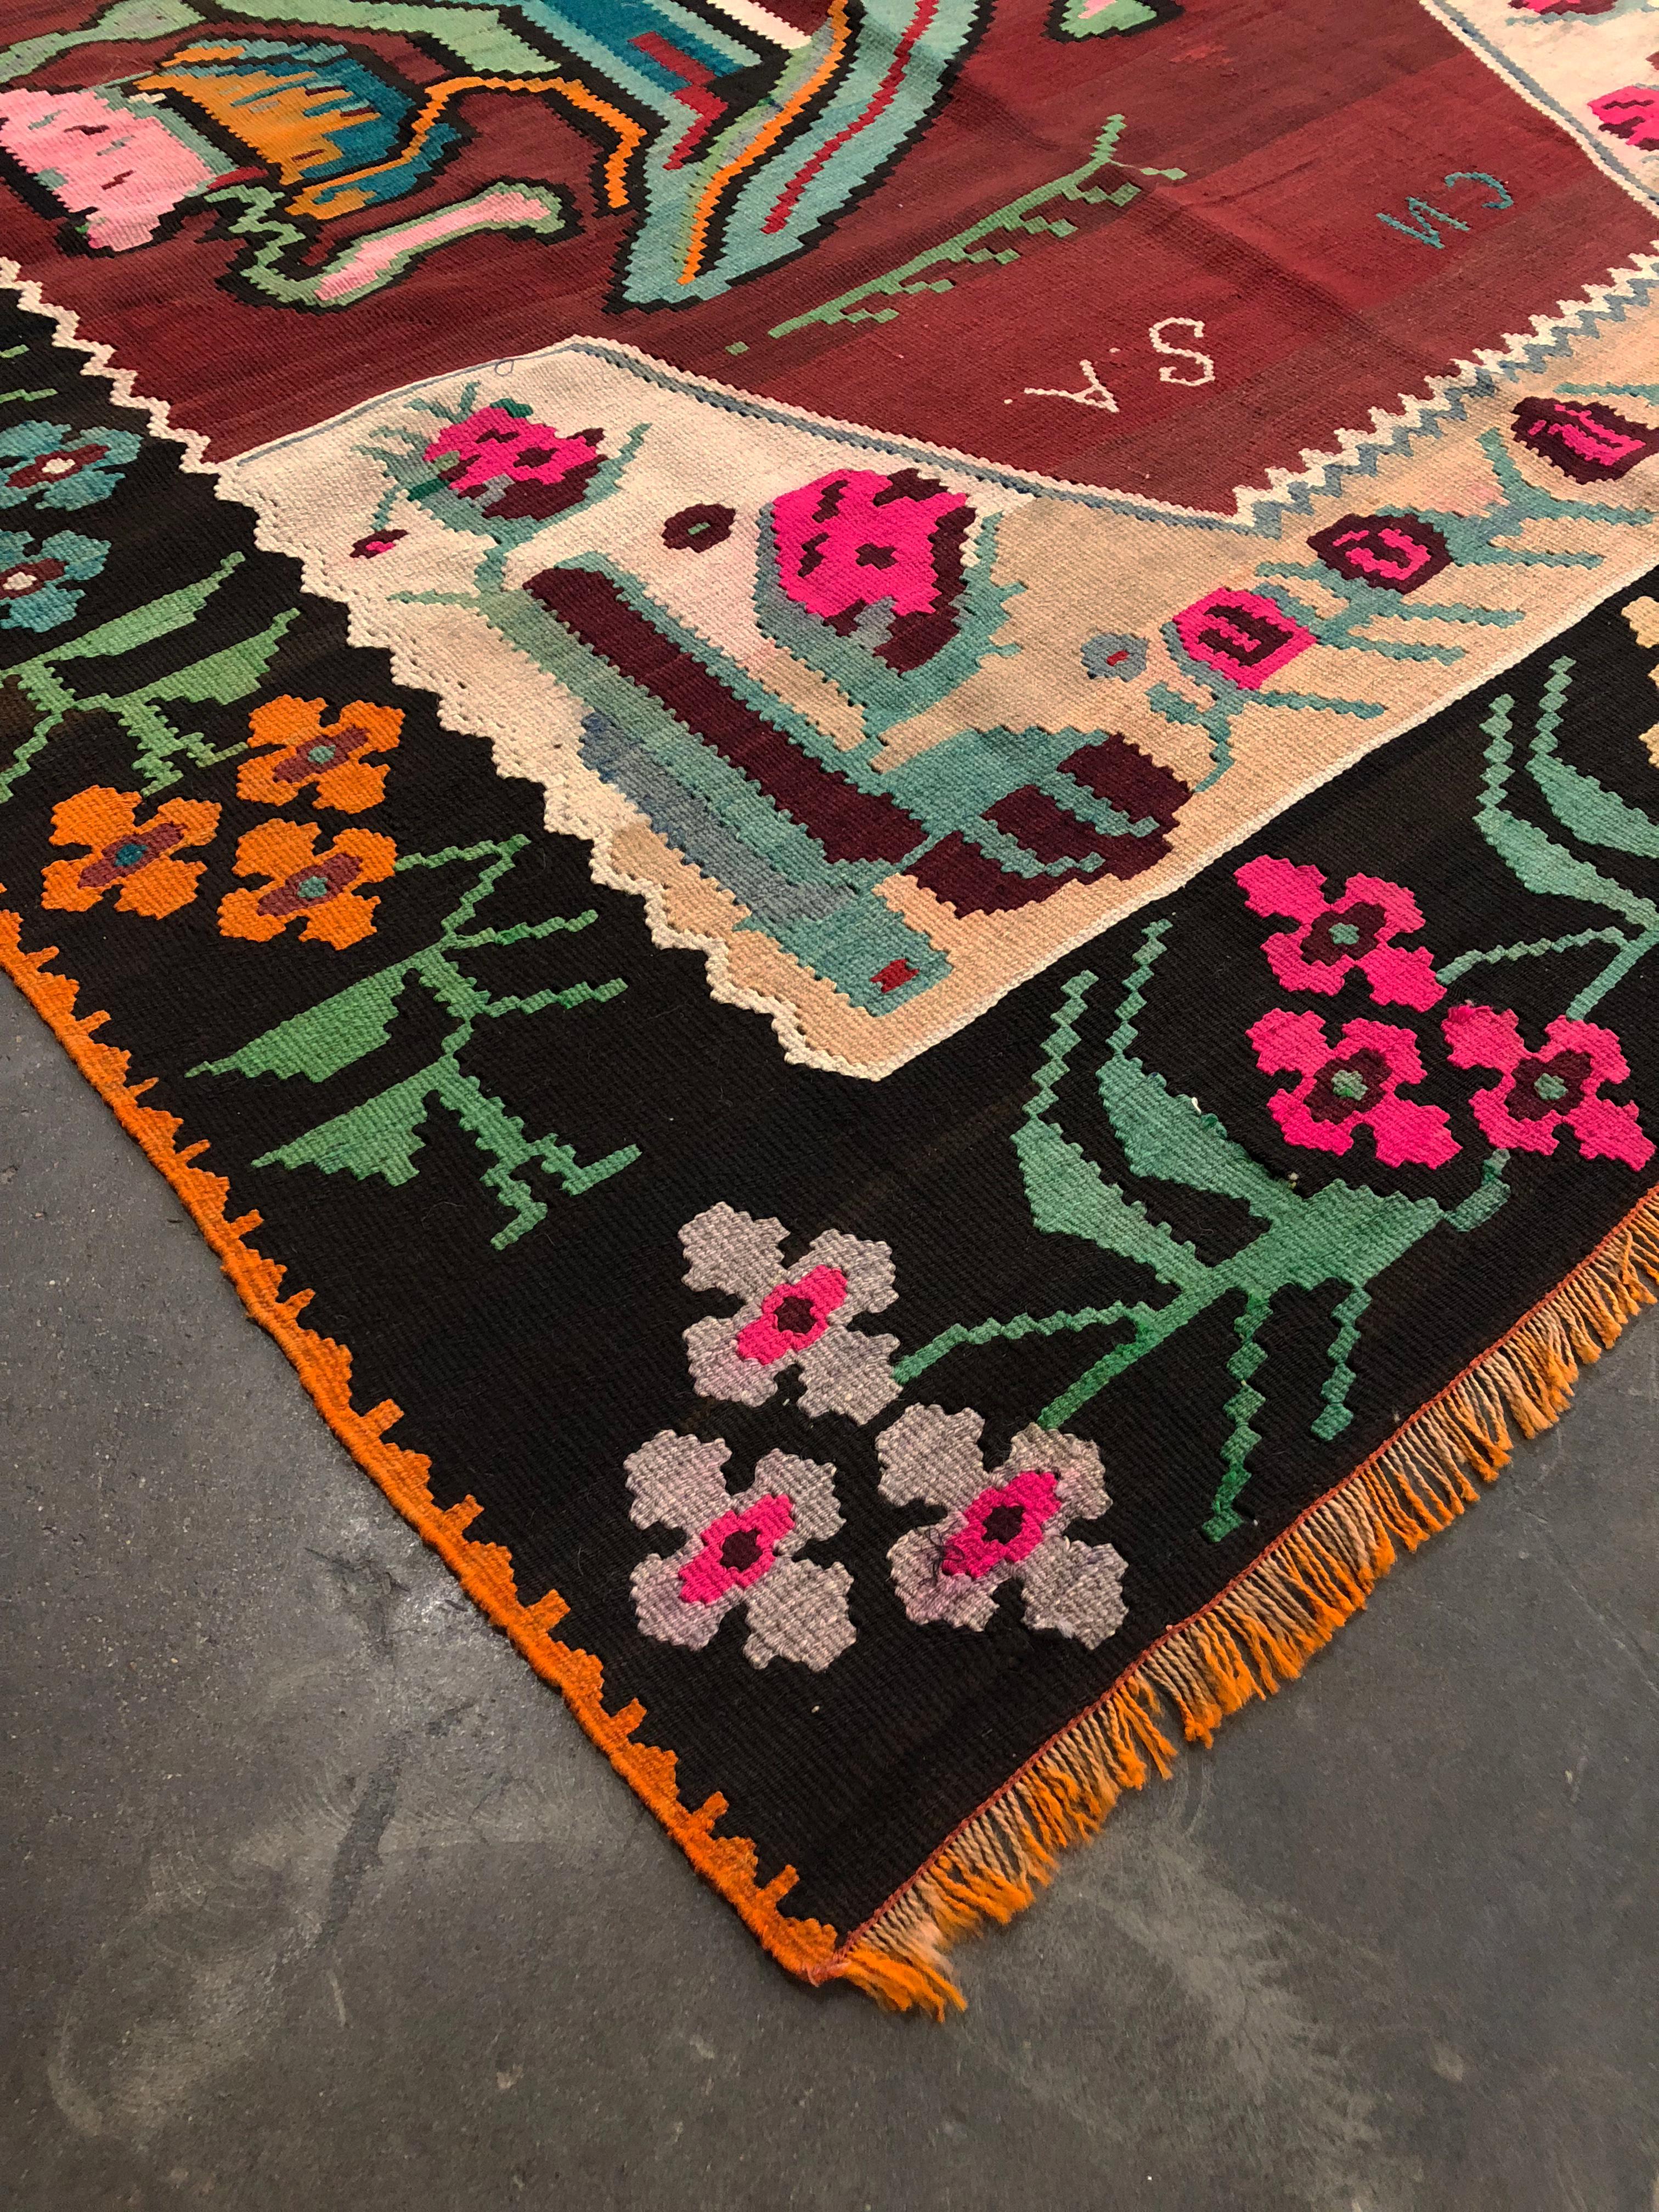 70343, vintage floral Turkish Kilim rug. Flaunt your florals and celebrate the beauty of a flower garden in bloom all year with a floral Turkish kilim rug. This hand-woven wool vintage floral Turkish kilim rug features a single rose enclosed by two